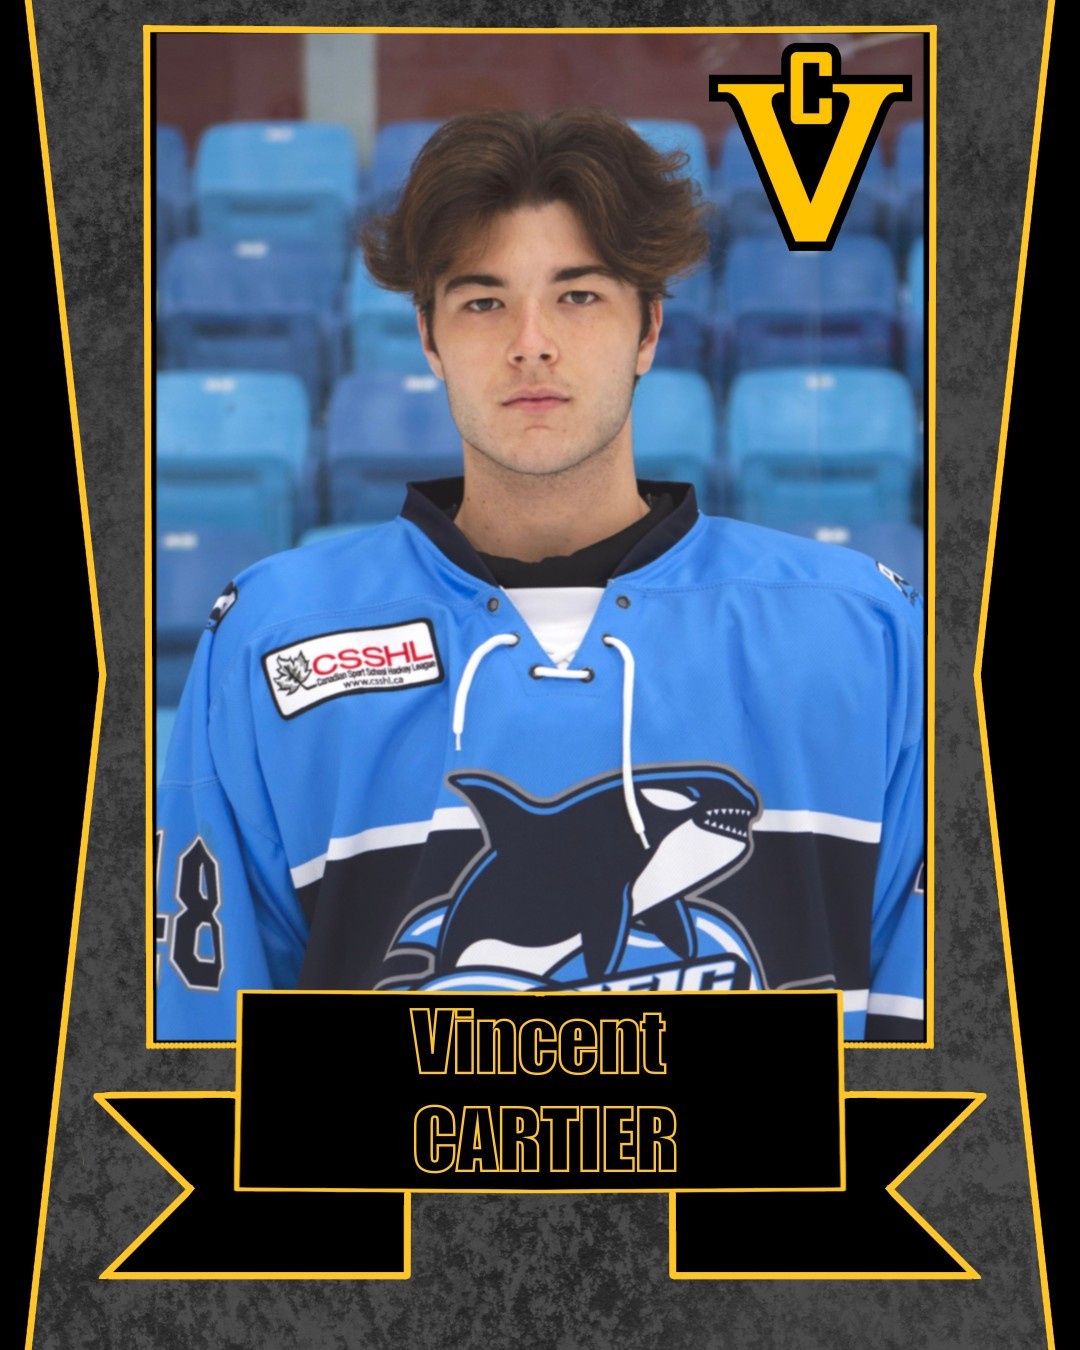 💥SIGNING ANNOUNCEMENT🏒

The Cougars have signed 2004 born D-man out of Drummondville, QC, Vincent Cartier! Cartier has spent this past season with PCHA with a stop last year in Florida in the USPHL Elite League. Welcome to the Cougars!